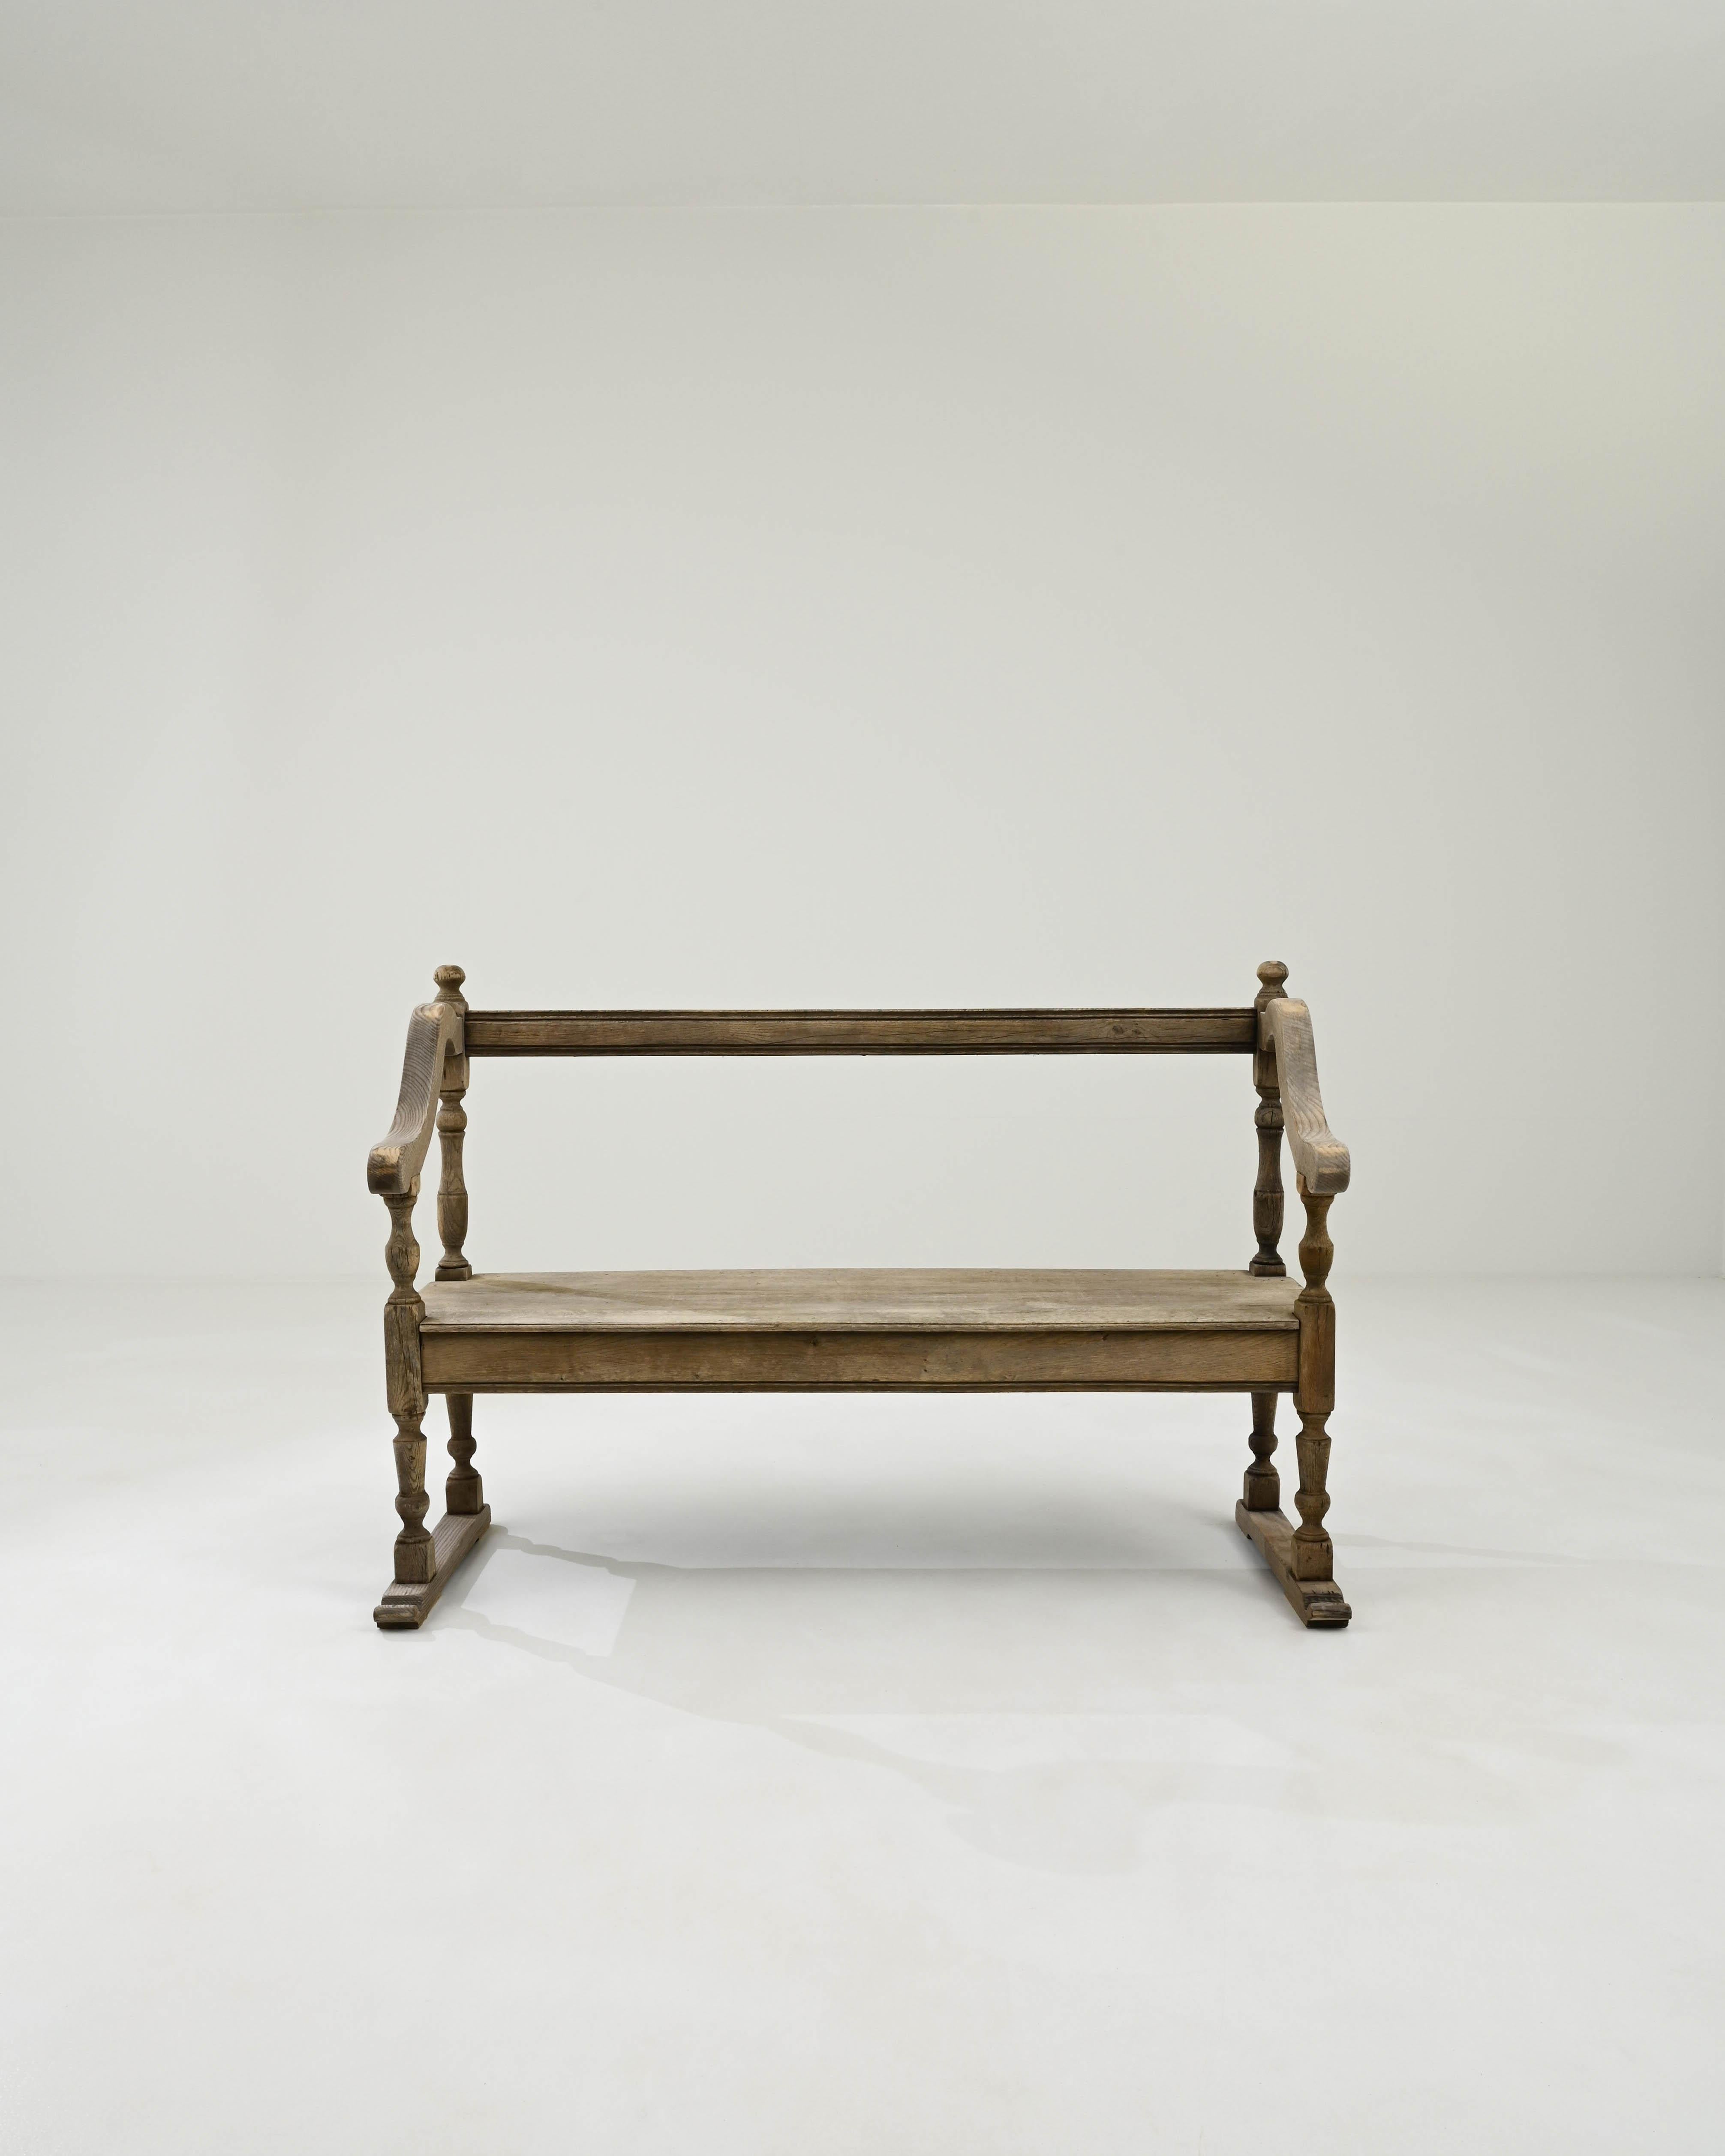 Hand-crafted from fine French oak, this 19th-century bench showcases artfully carved baluster legs that culminate in a stylish base, providing extra support and lending the piece a distinctive appeal. The playfully curving armrests are adorned with